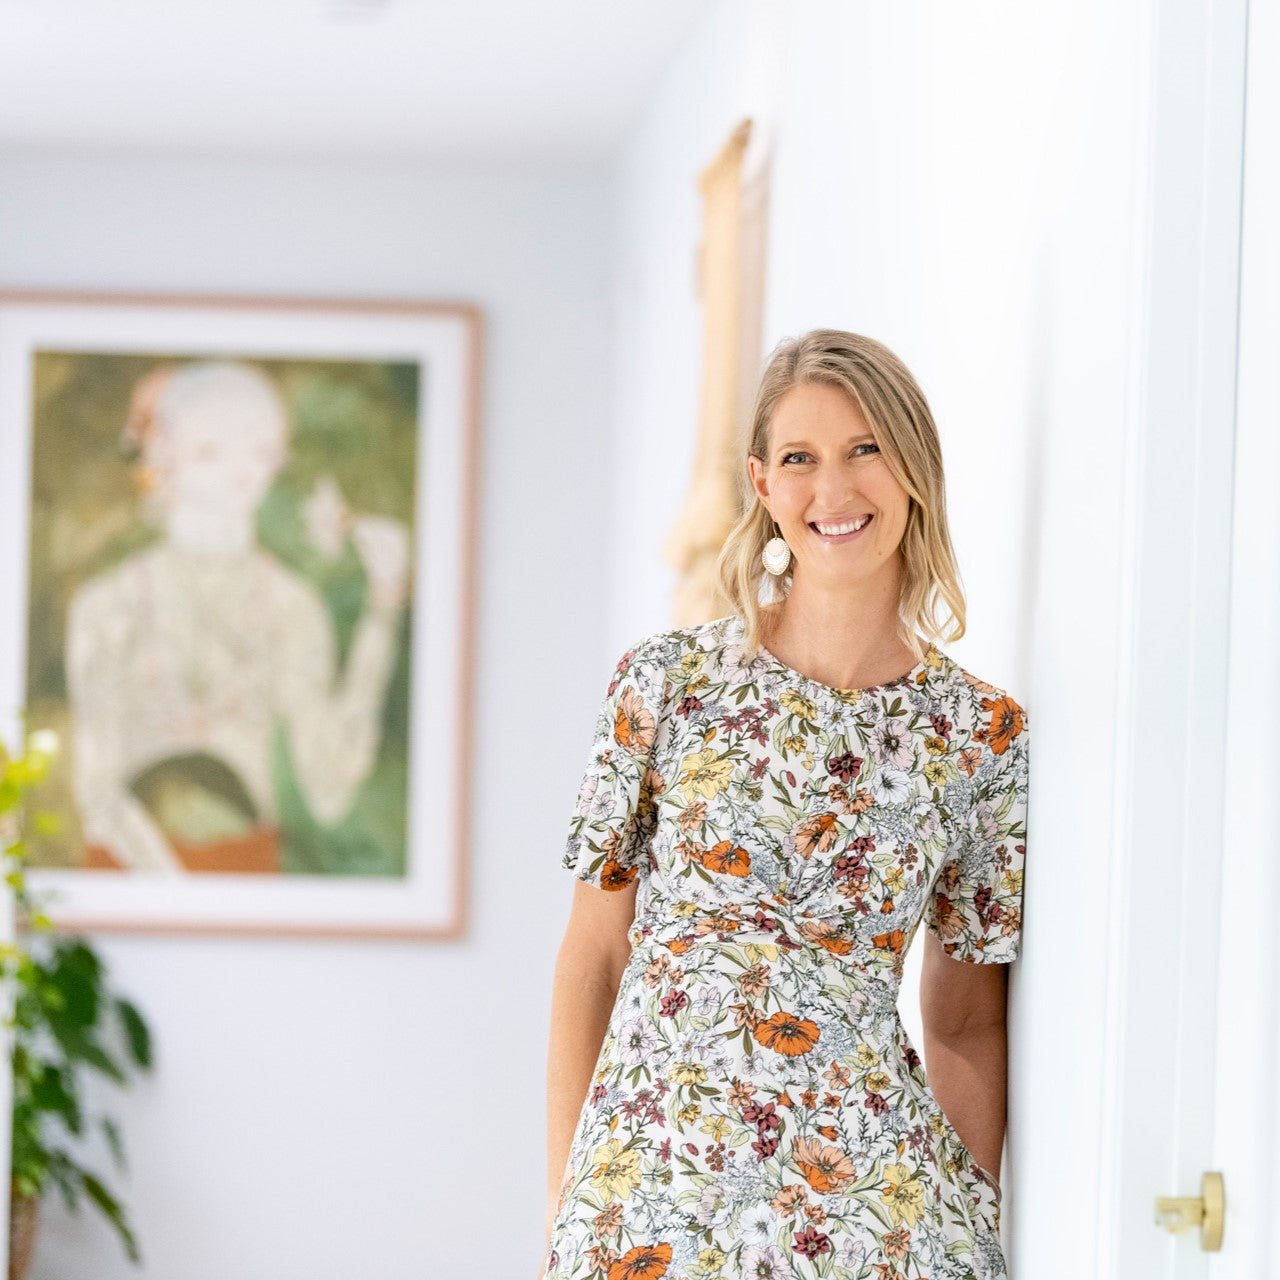 Anna, founder of Lighthouse Lane, the online store for best pendant lights. Anna is smiling directly at the camera and wears a floral summer dress.